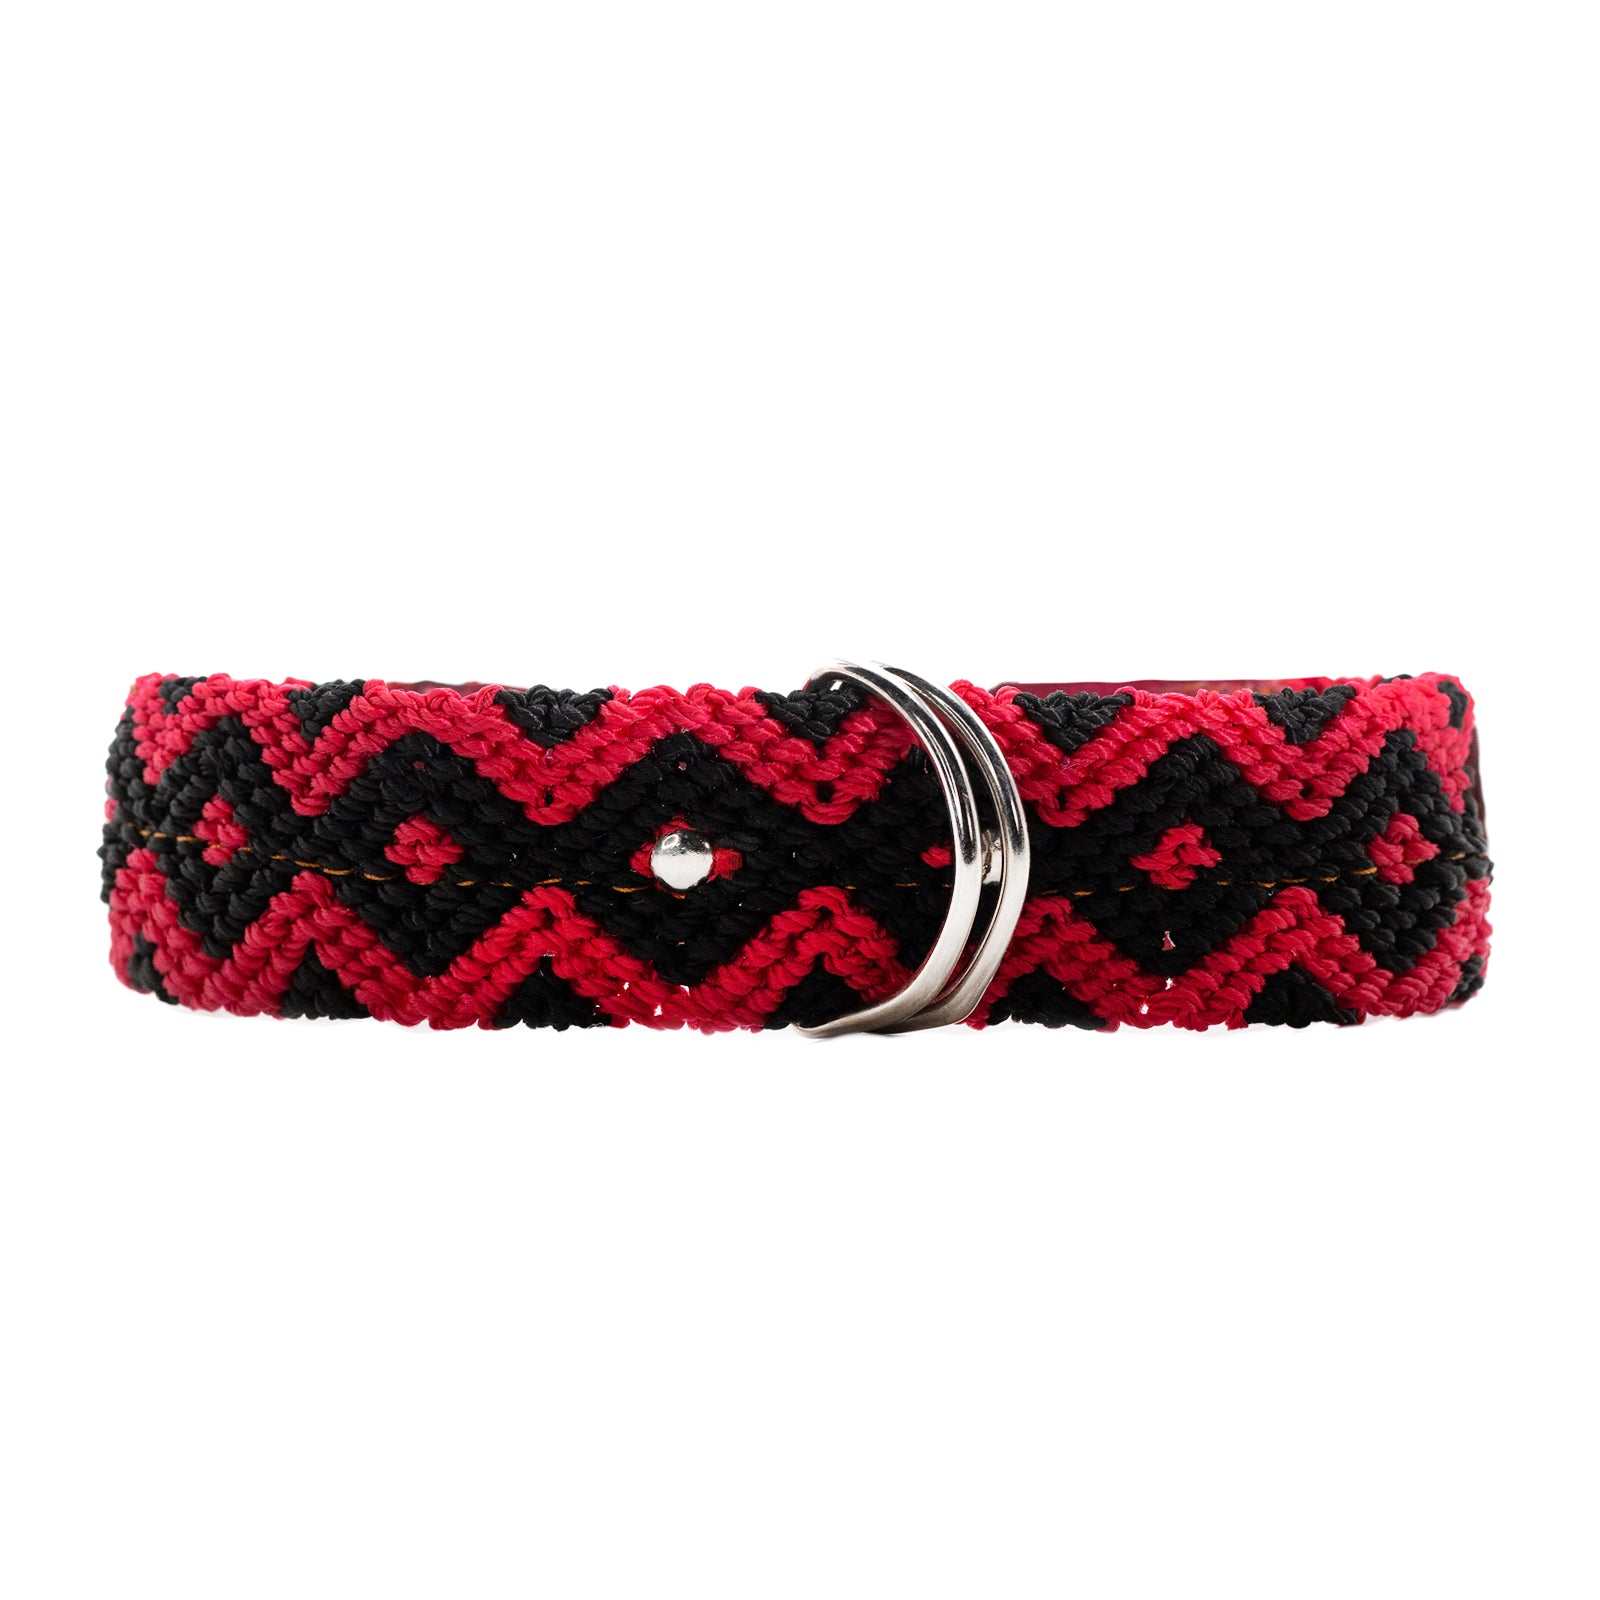 Handwoven dog collar with a touch of elegance